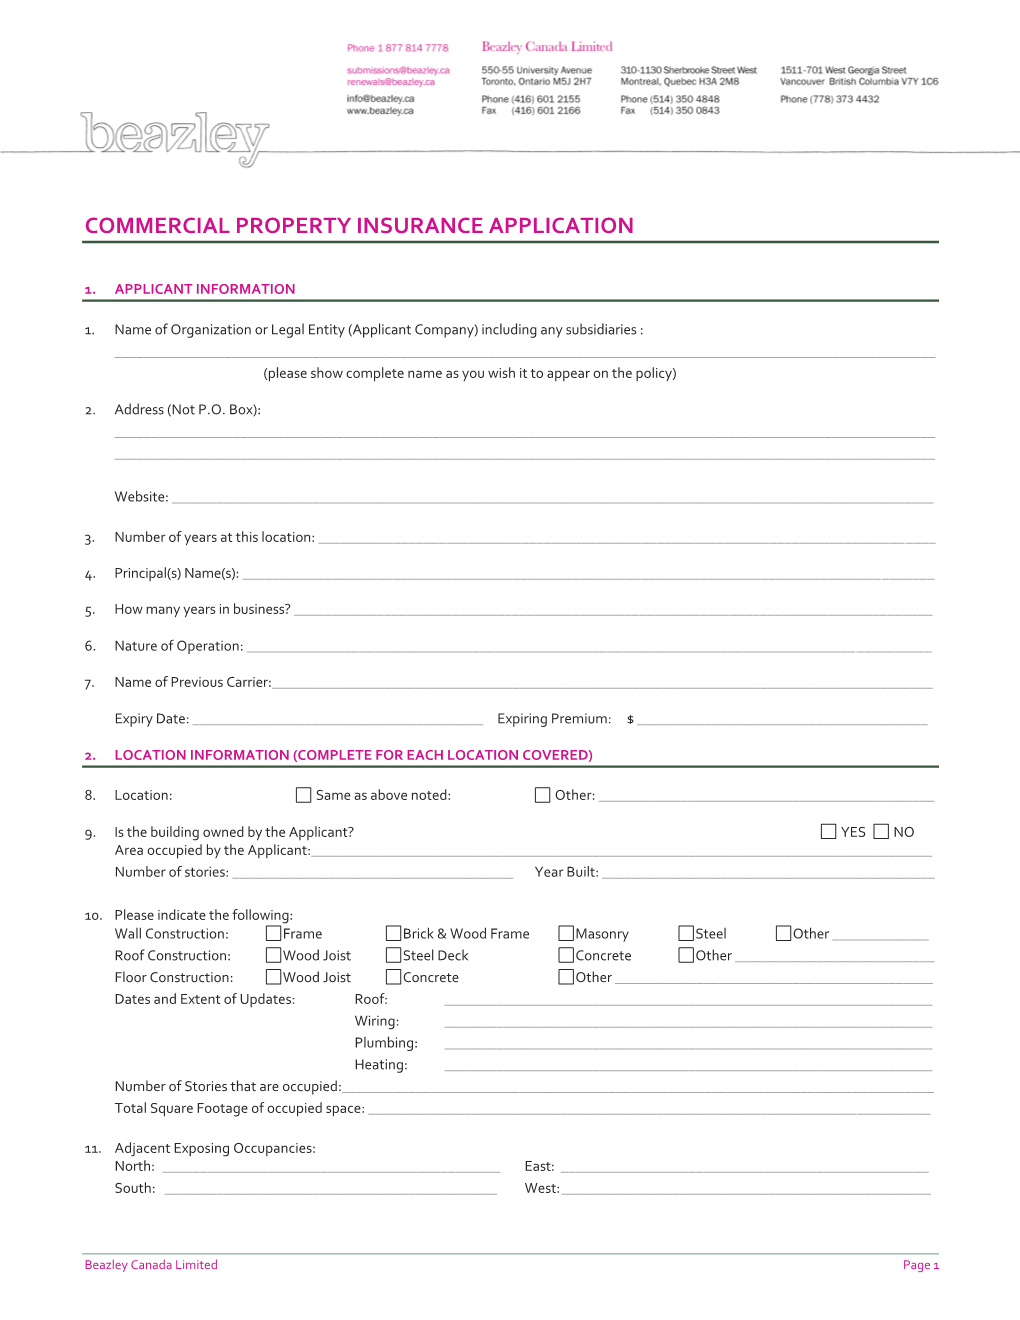 Commercial Property Insurance Application